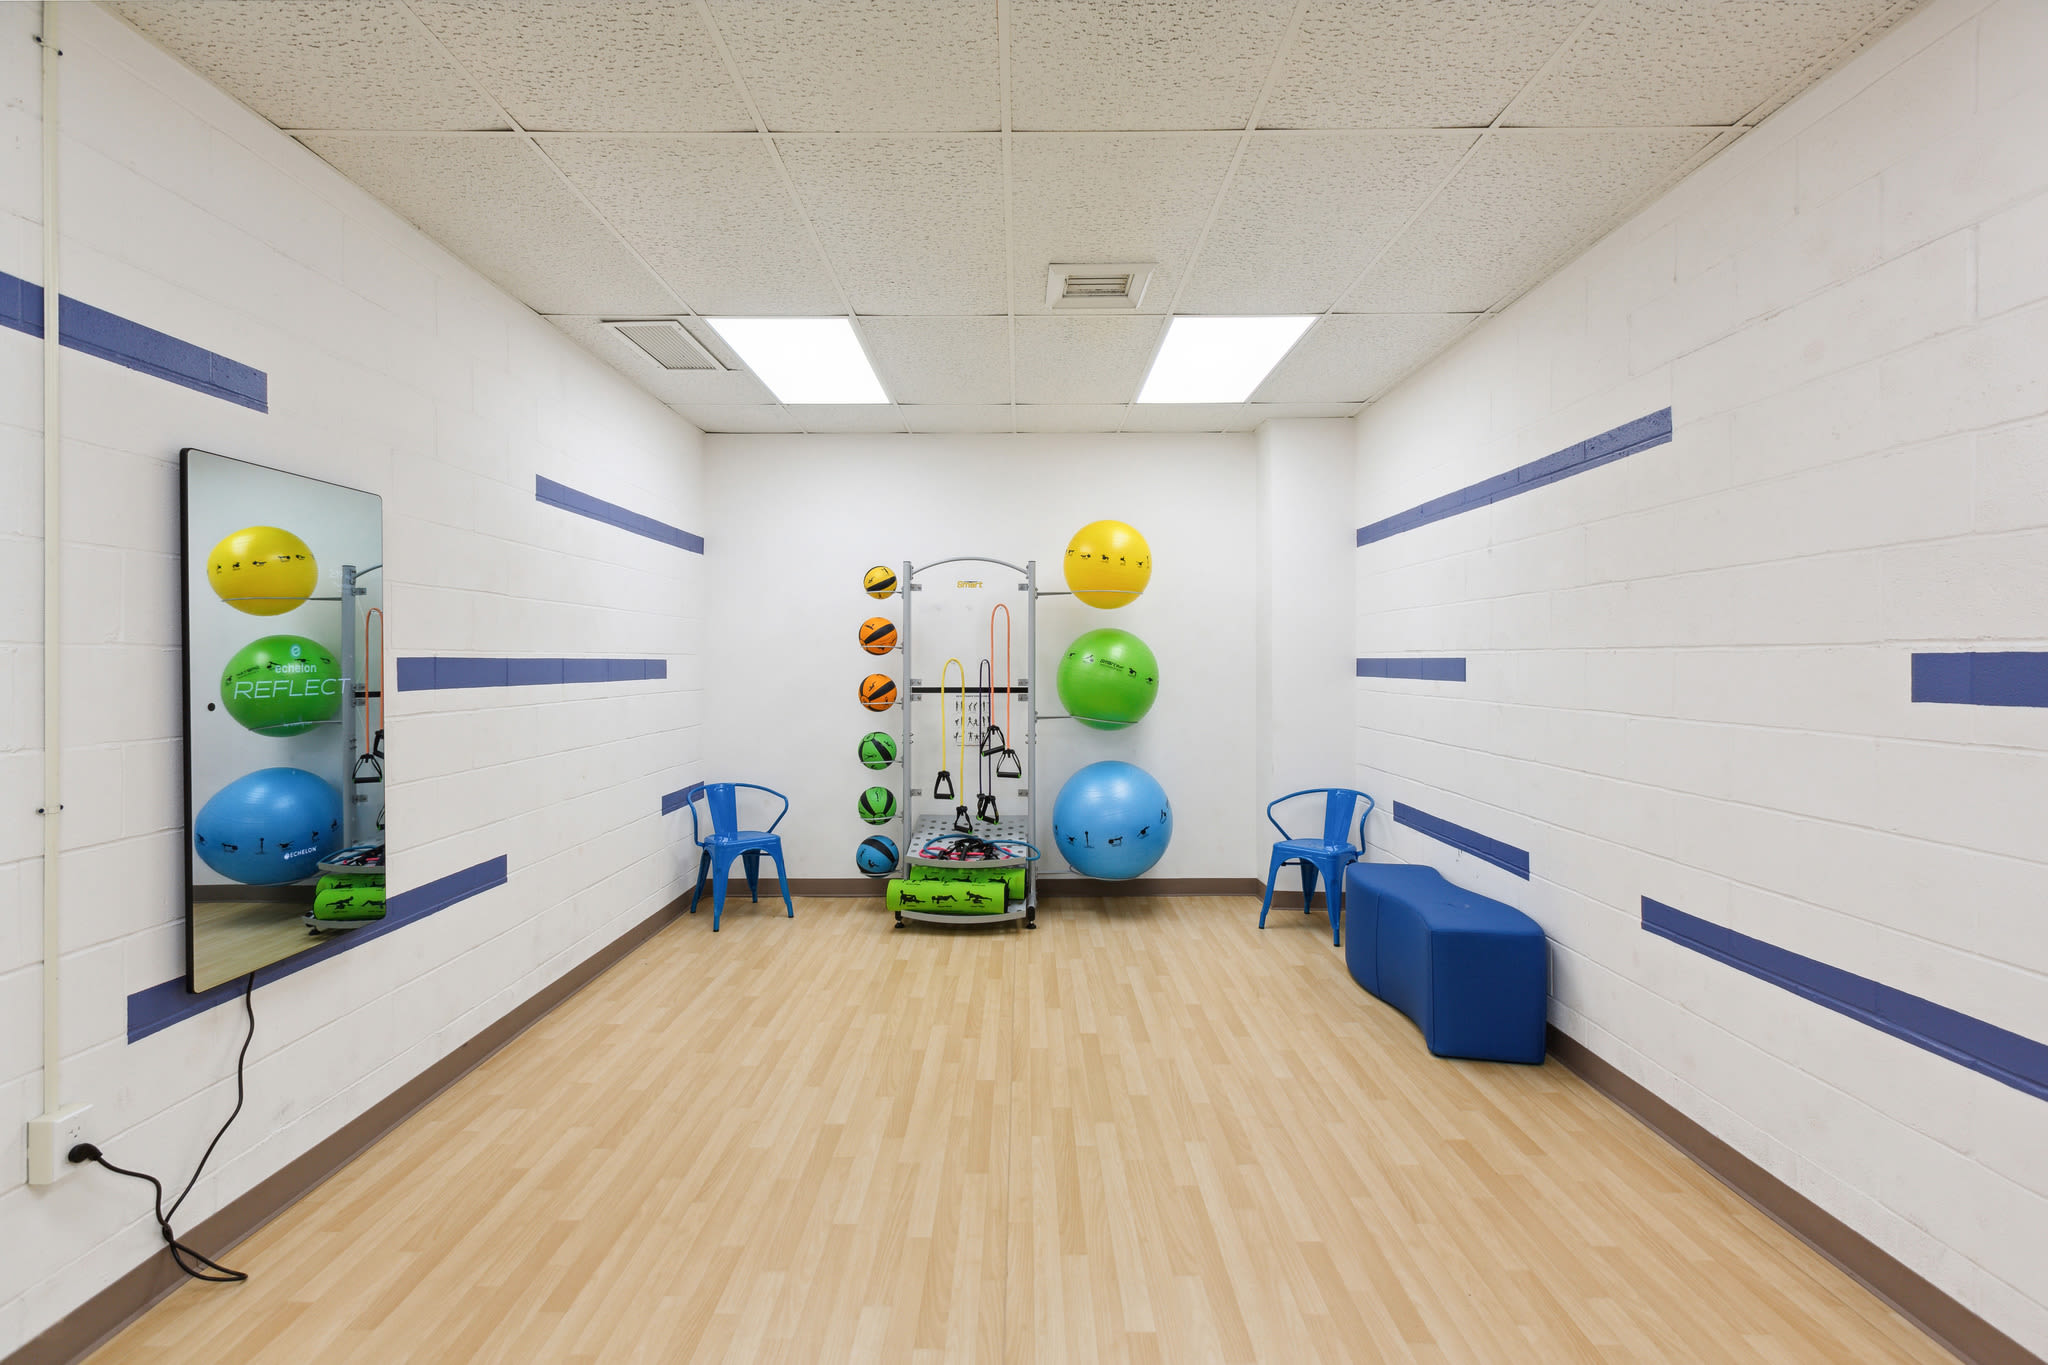 Gym with Balls at The Venue in Rochester, New York.